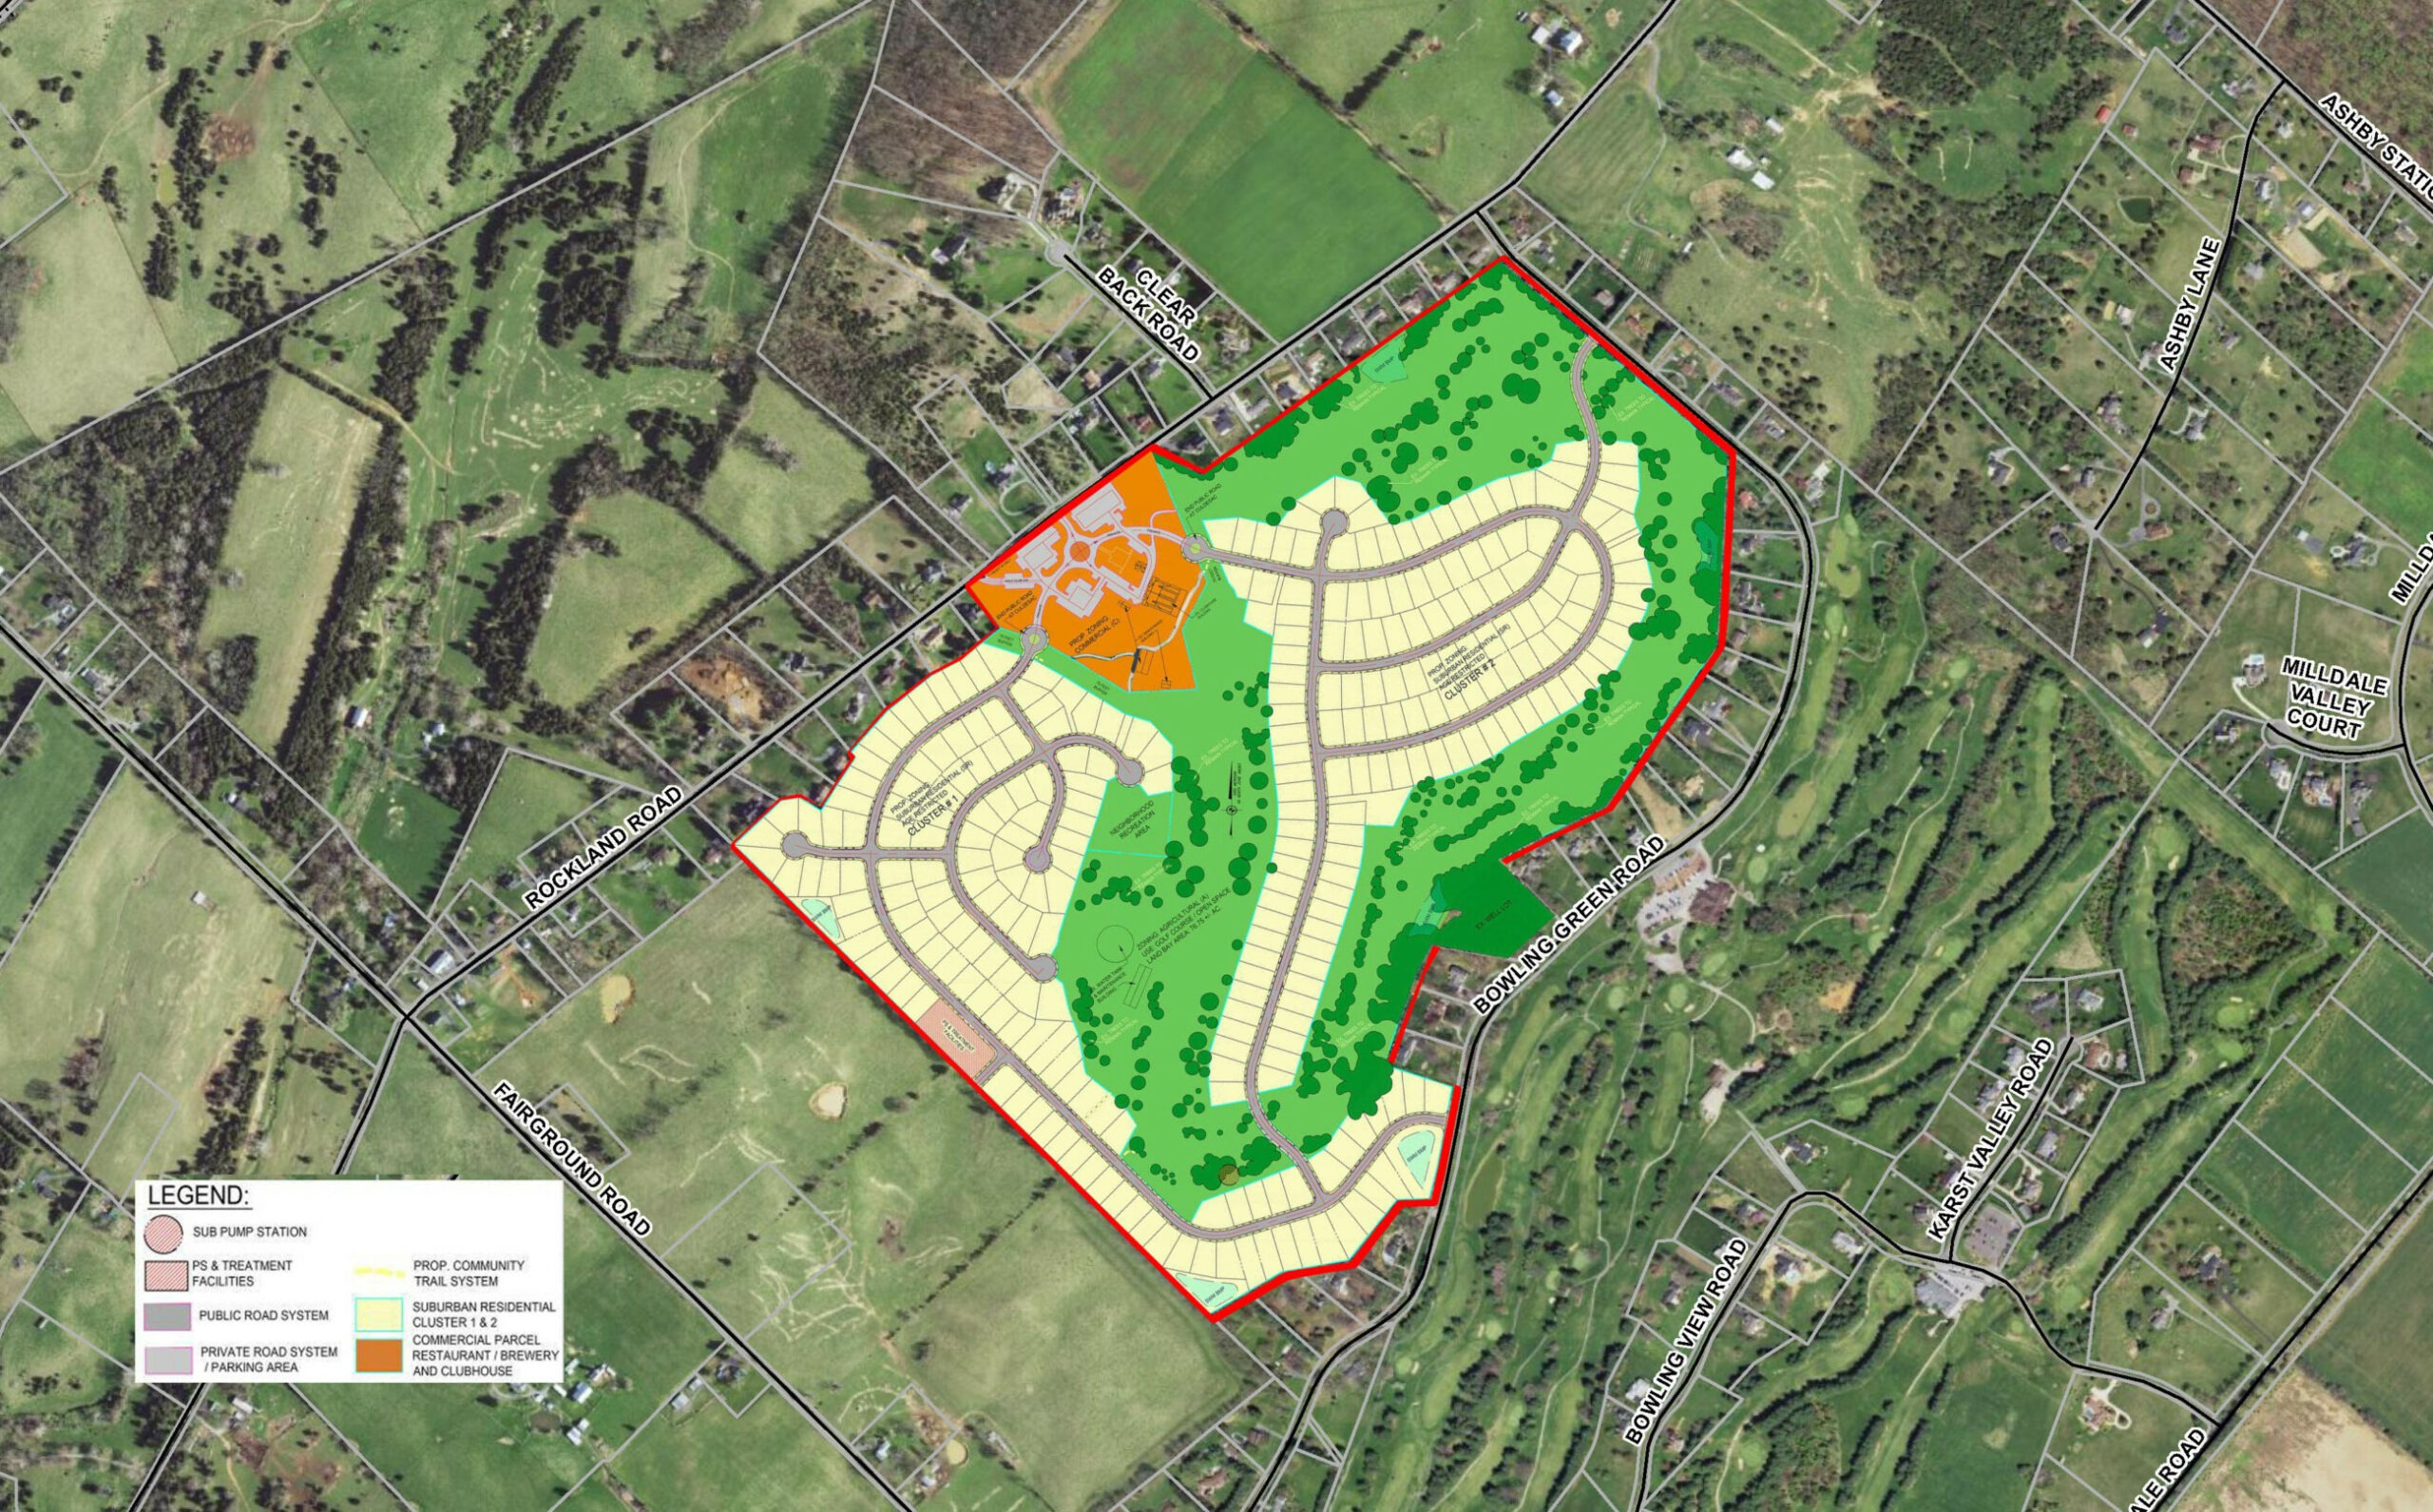 A site plan of the proposed development overlayed on the aerial map.